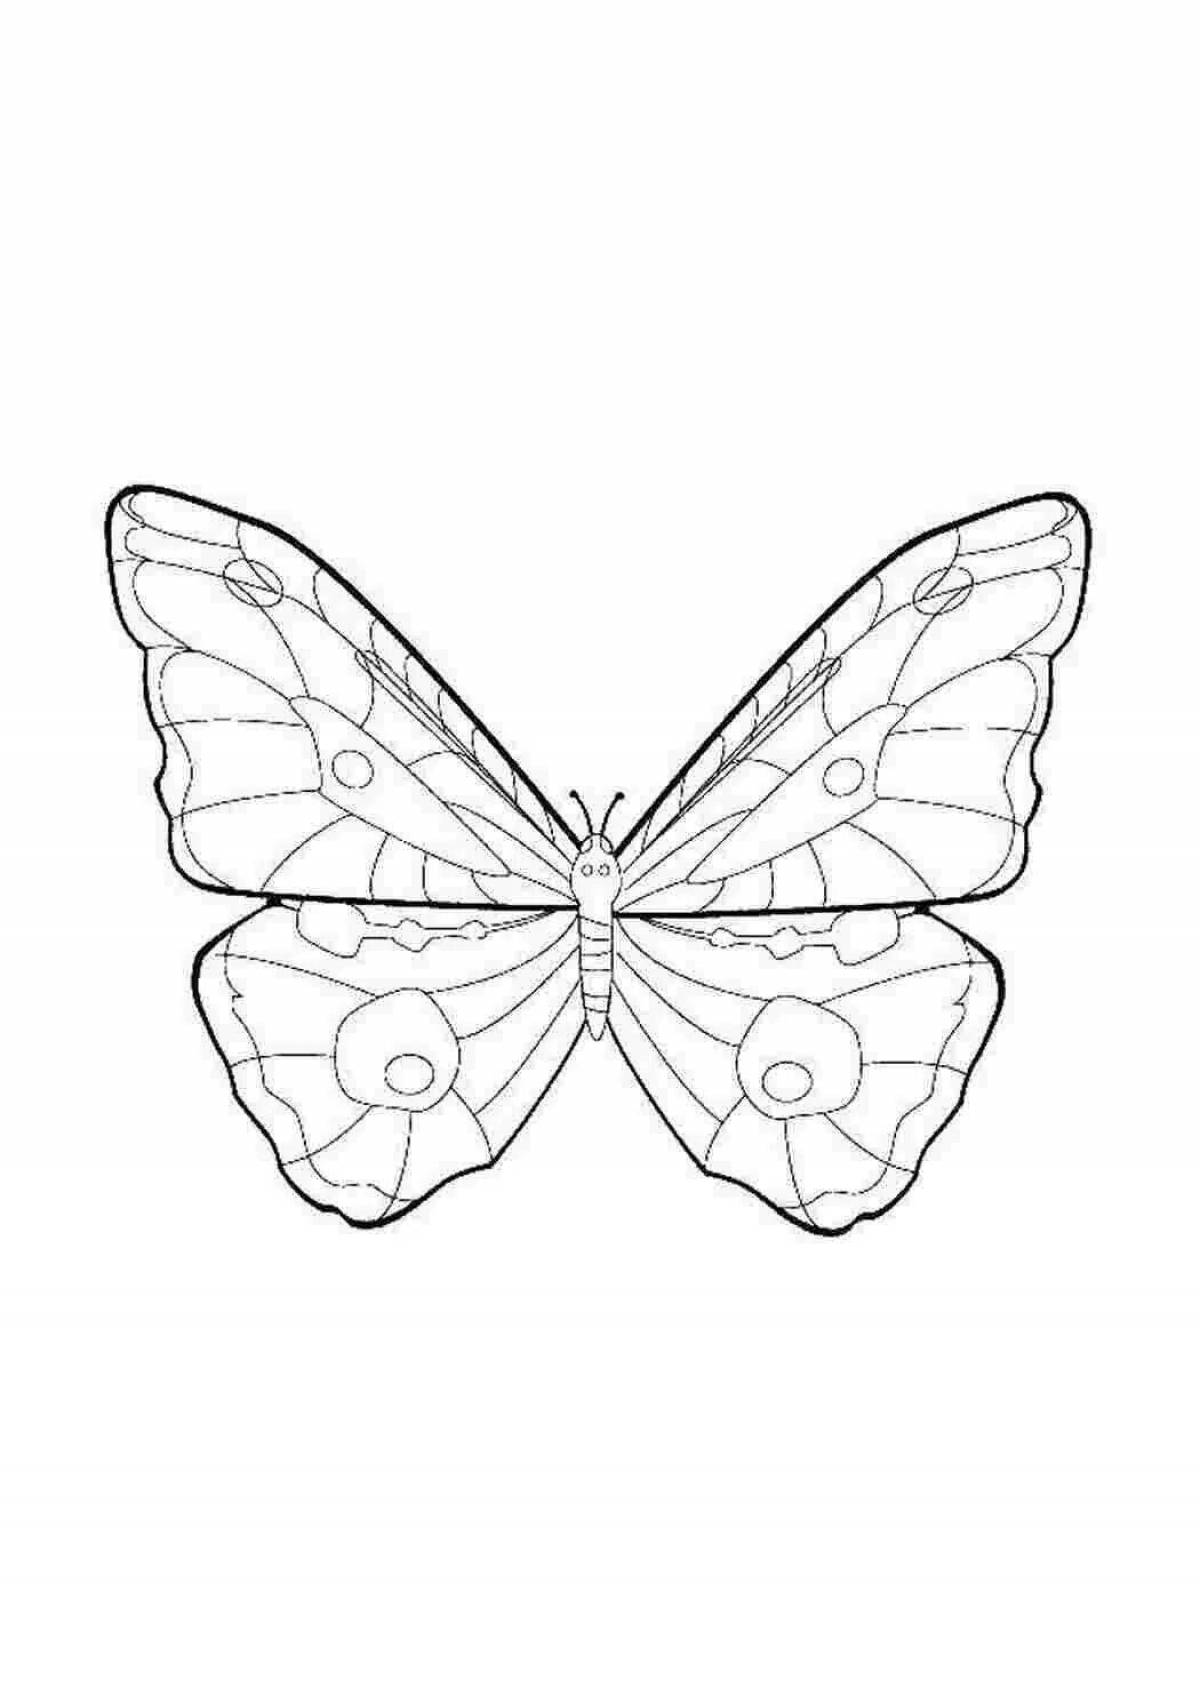 Majestic outline of a butterfly coloring book